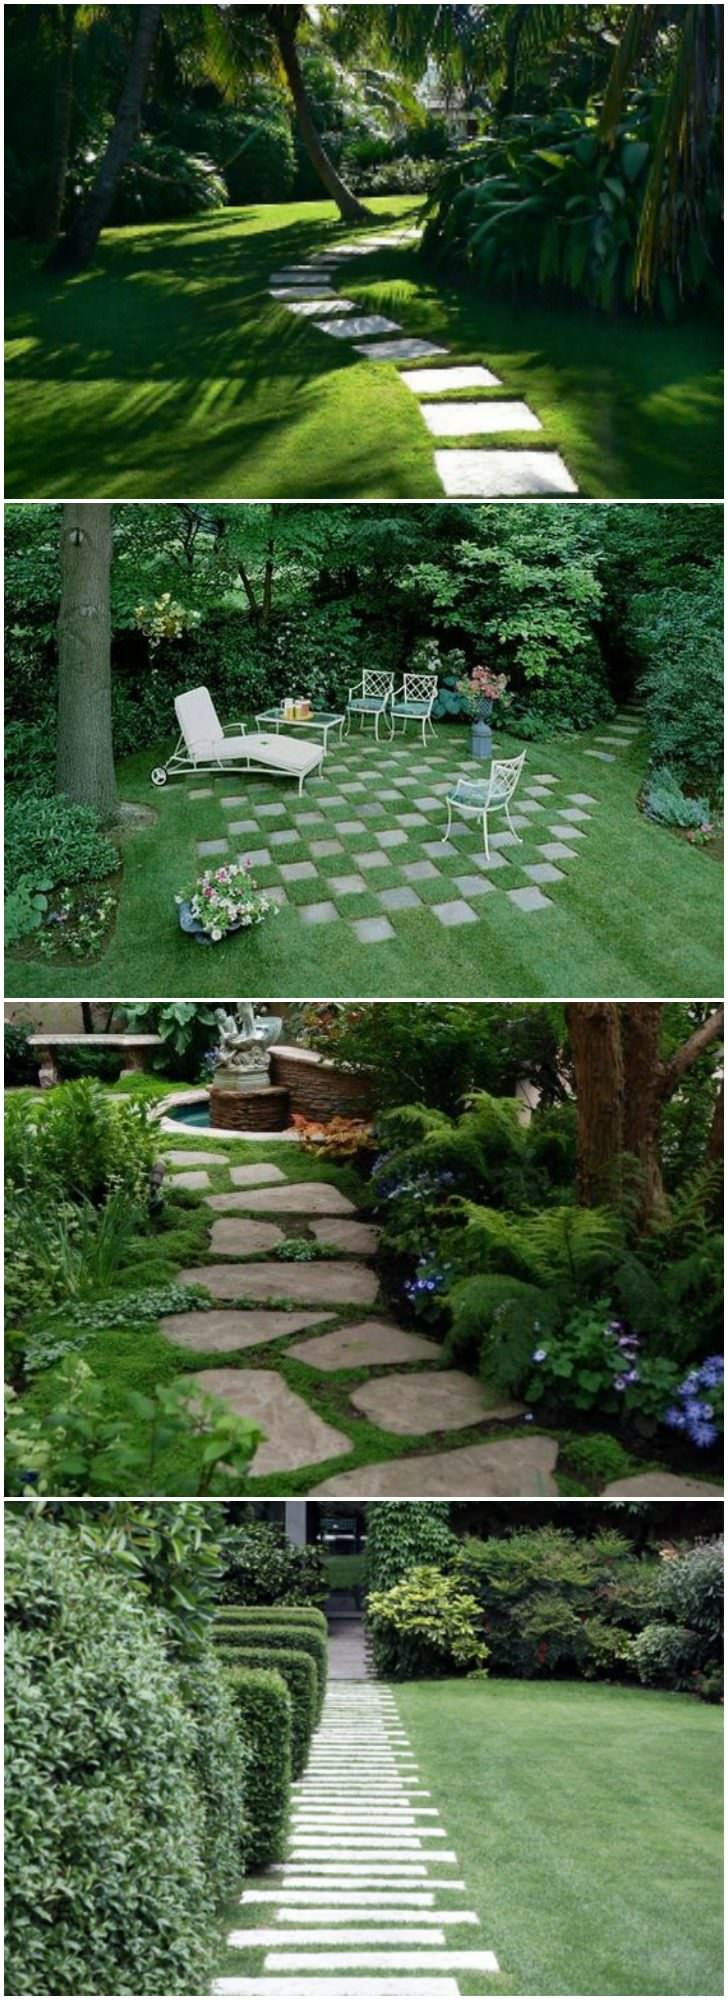 Landscape Design Pictures
 11 Lawn Landscaping Design Ideas Anyone Can Make 11